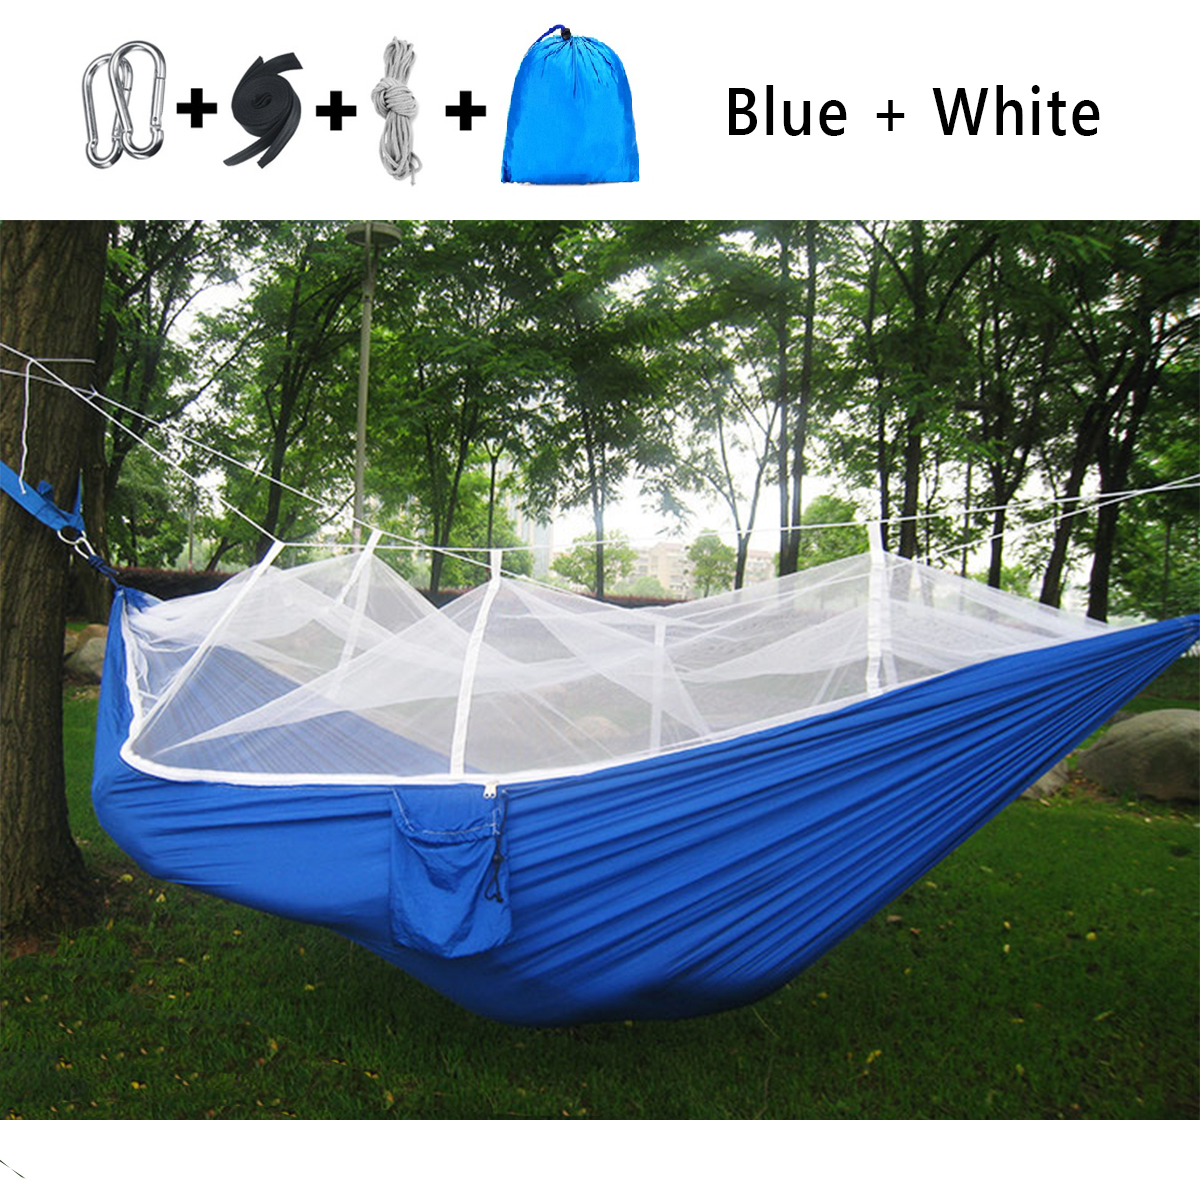 300kg-Portable-Double-Camping-Hammock-Parachute-Fabric-With-Mosquito-Net-1609645-4